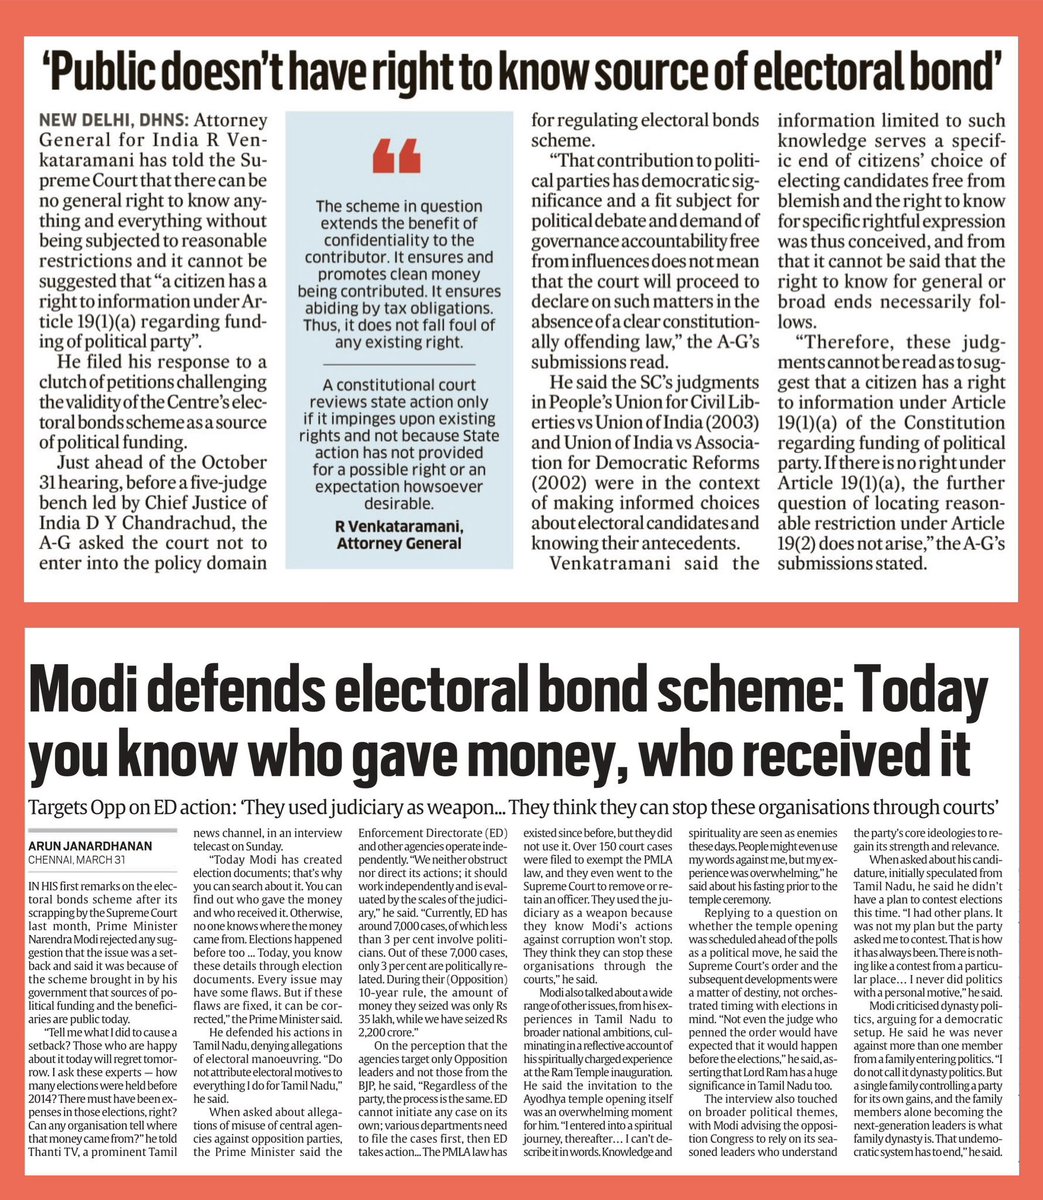 R Venkataramani, Attorney General of India on 30 October 2023: “Public doesn't have right to know source of electoral bond” Narendra Modi, Prime Minister of India on 30 March 2024: “Today you know who gave money, who received it” #ElectoralBondsScam